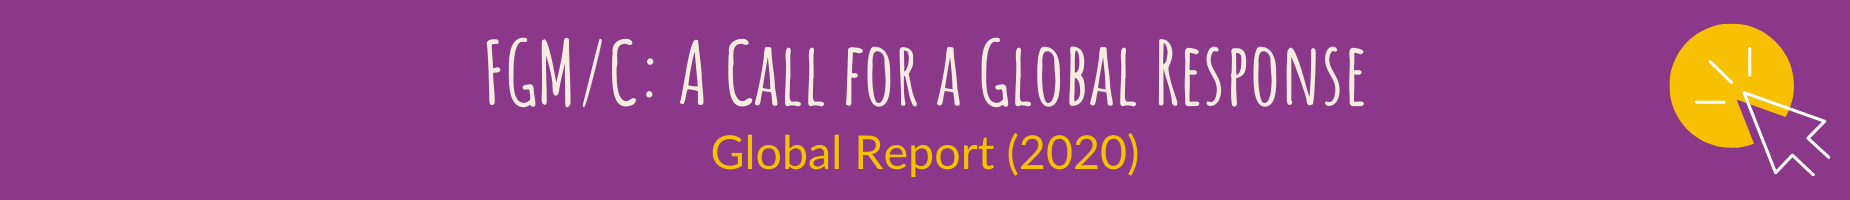 FGM/C: A Call for a Global Response - Global Report (2020)